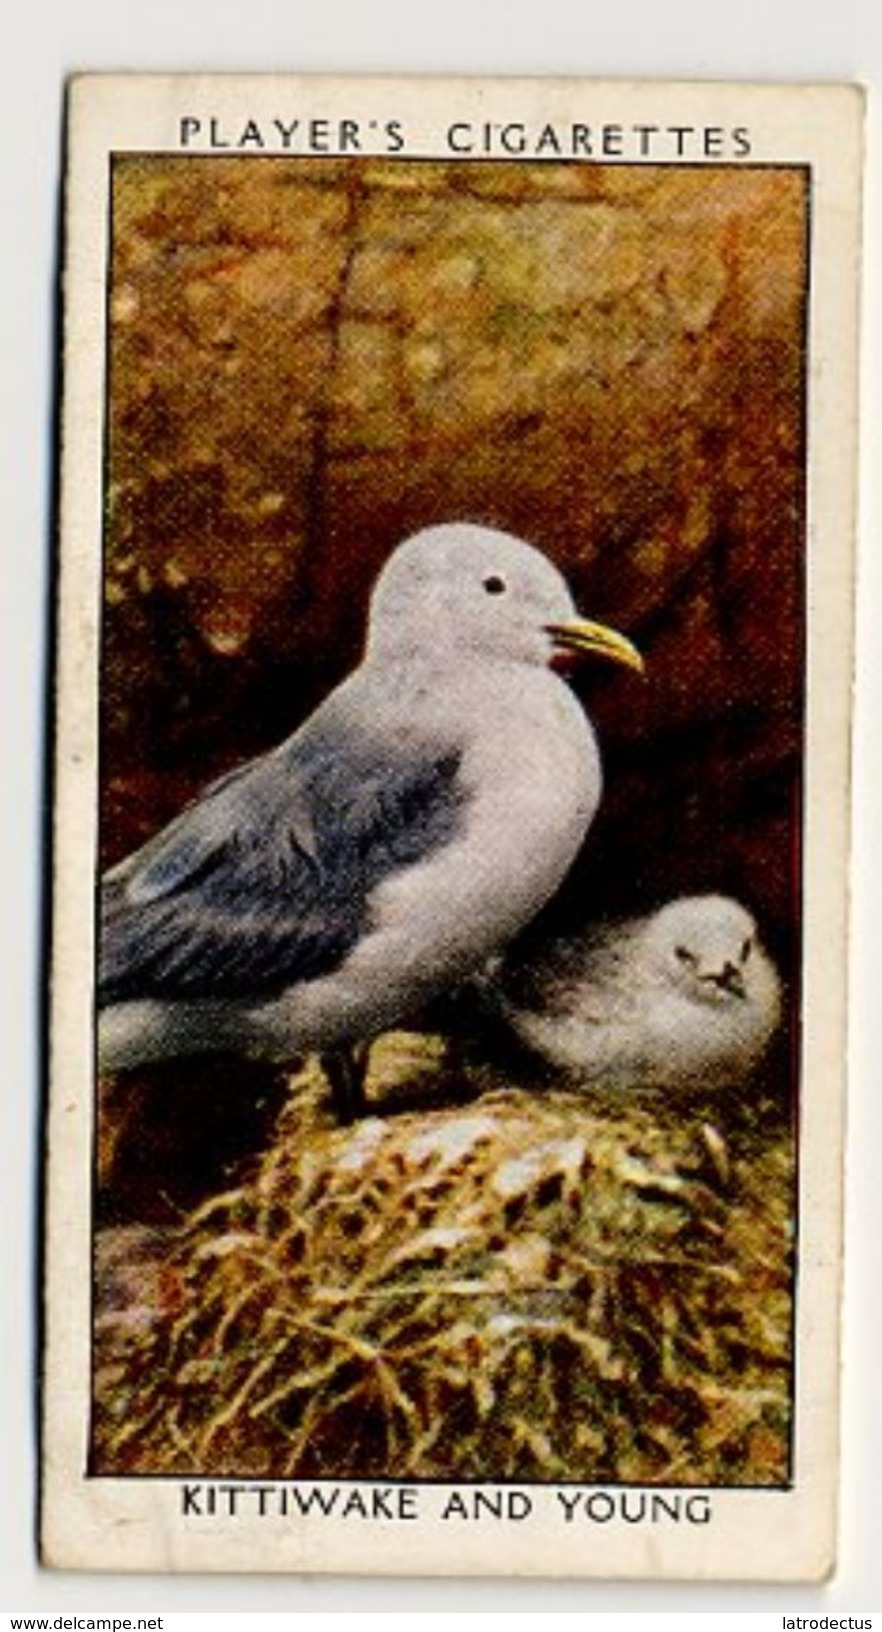 Player - 1932 - Wild Birds - 19 - Kittiwake And Young - Player's